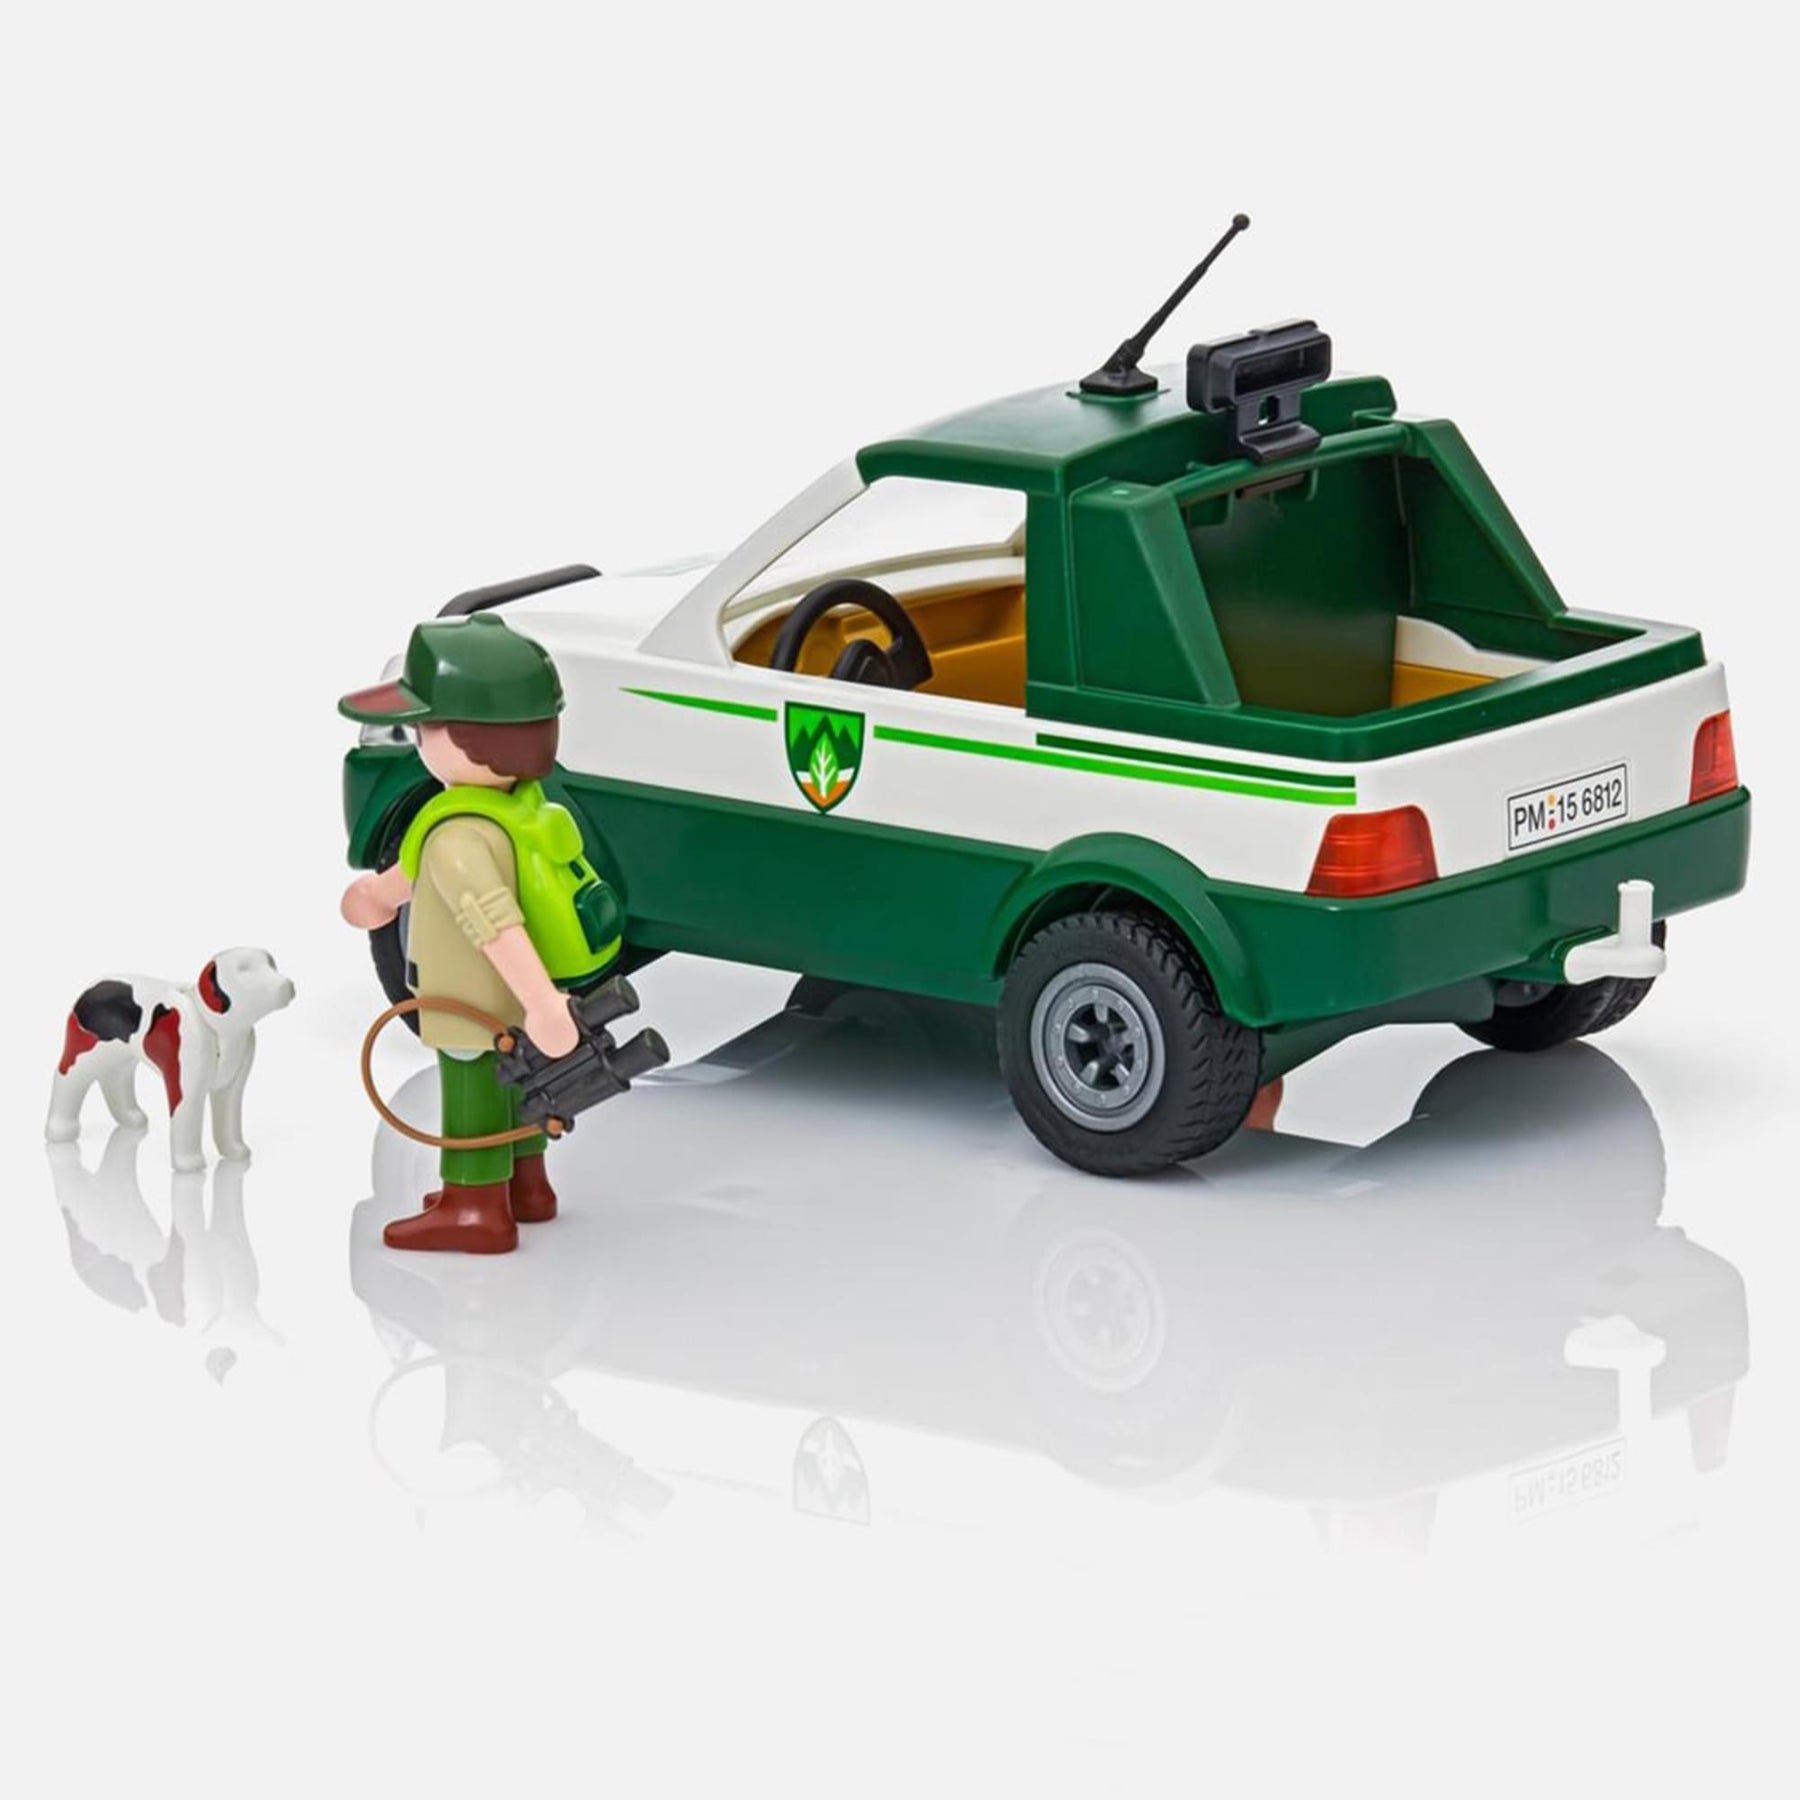 Playmobil 6812 Country Forest Ranger Pick Up Truck Building Set